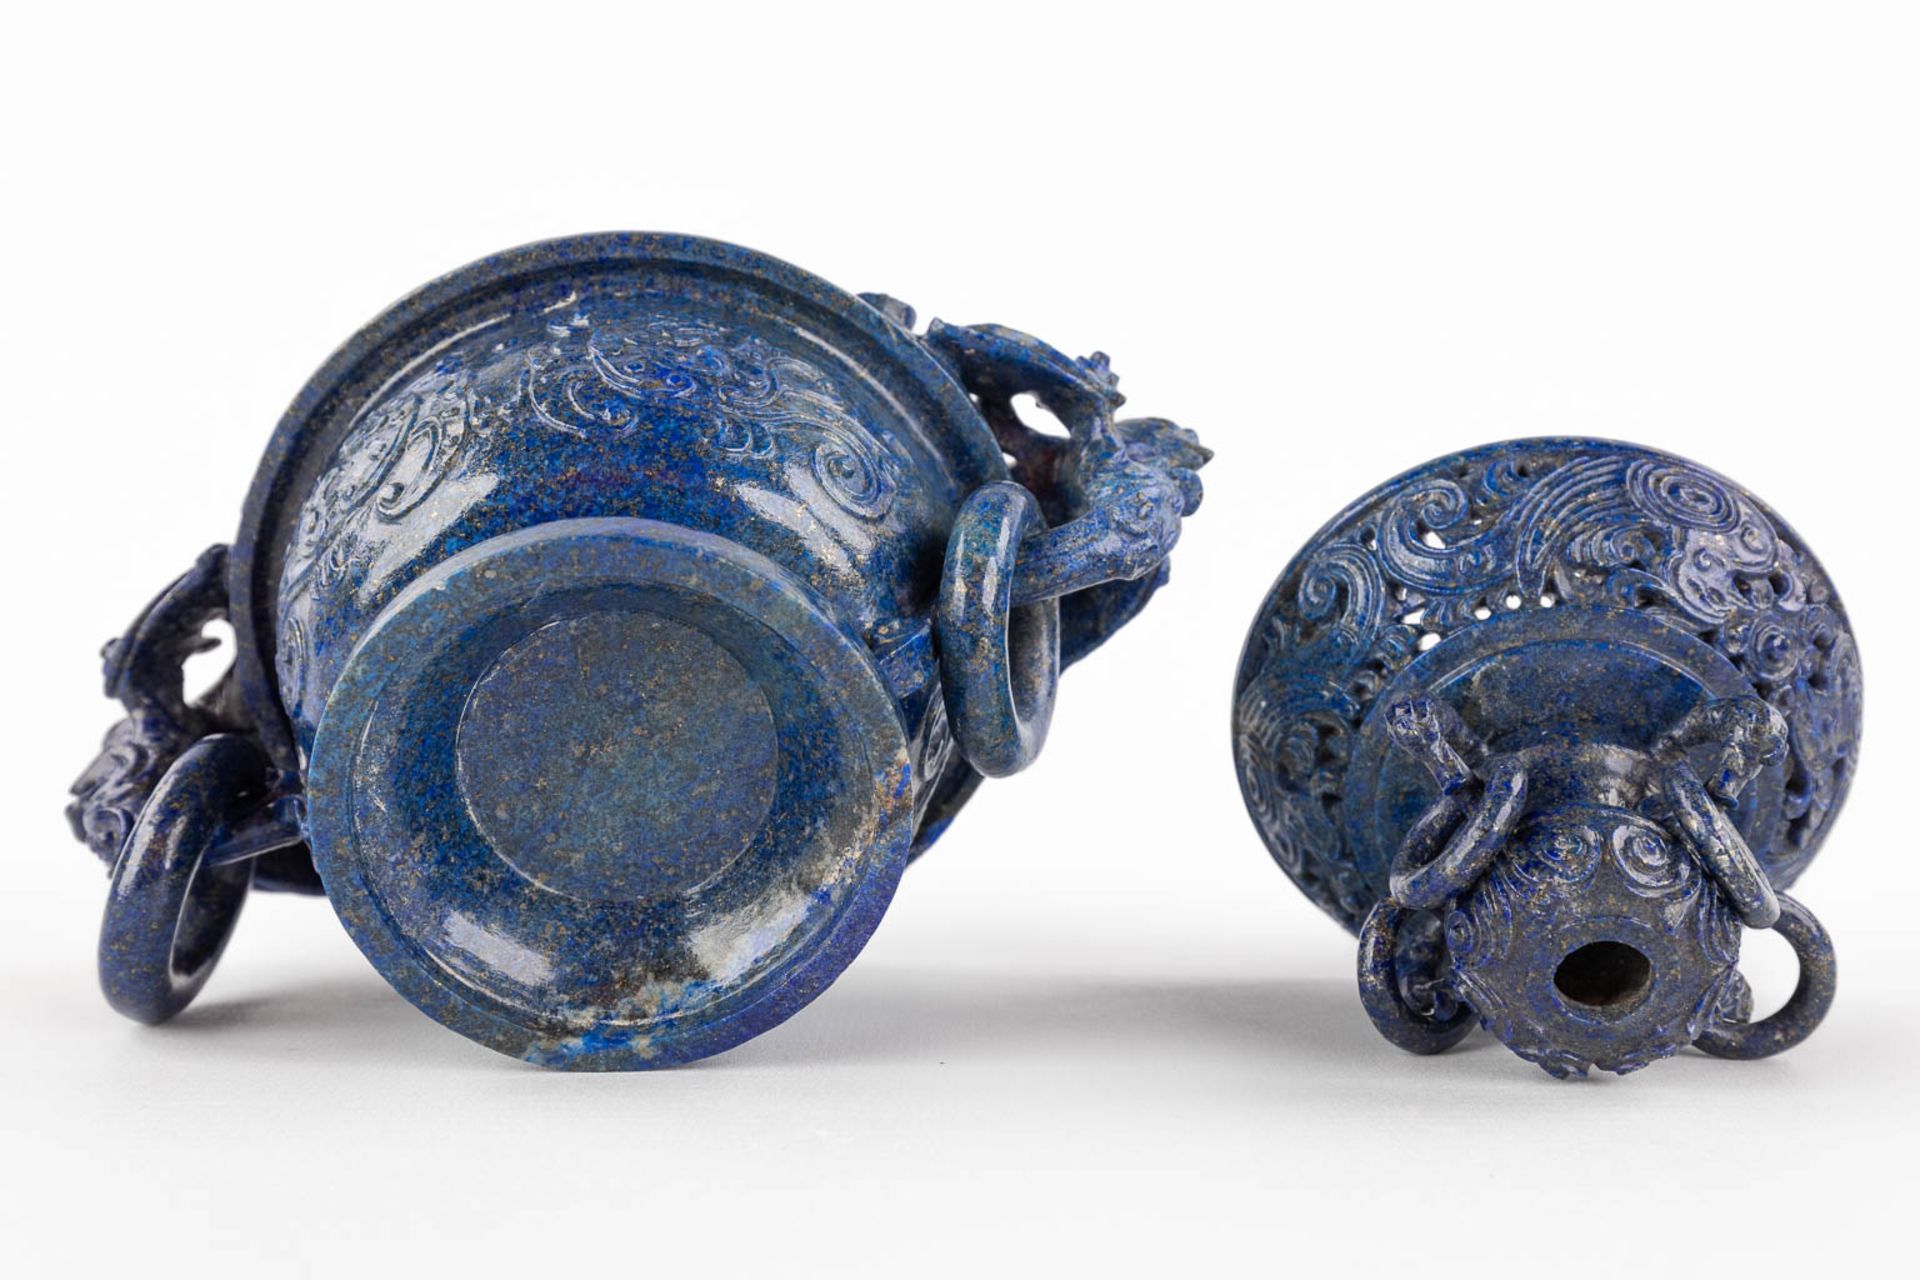 A Chinese censer, sculptured Lapis Lazuli, decorated with birds and flowers. (D:11 x W:17 x H:14 cm) - Image 8 of 11